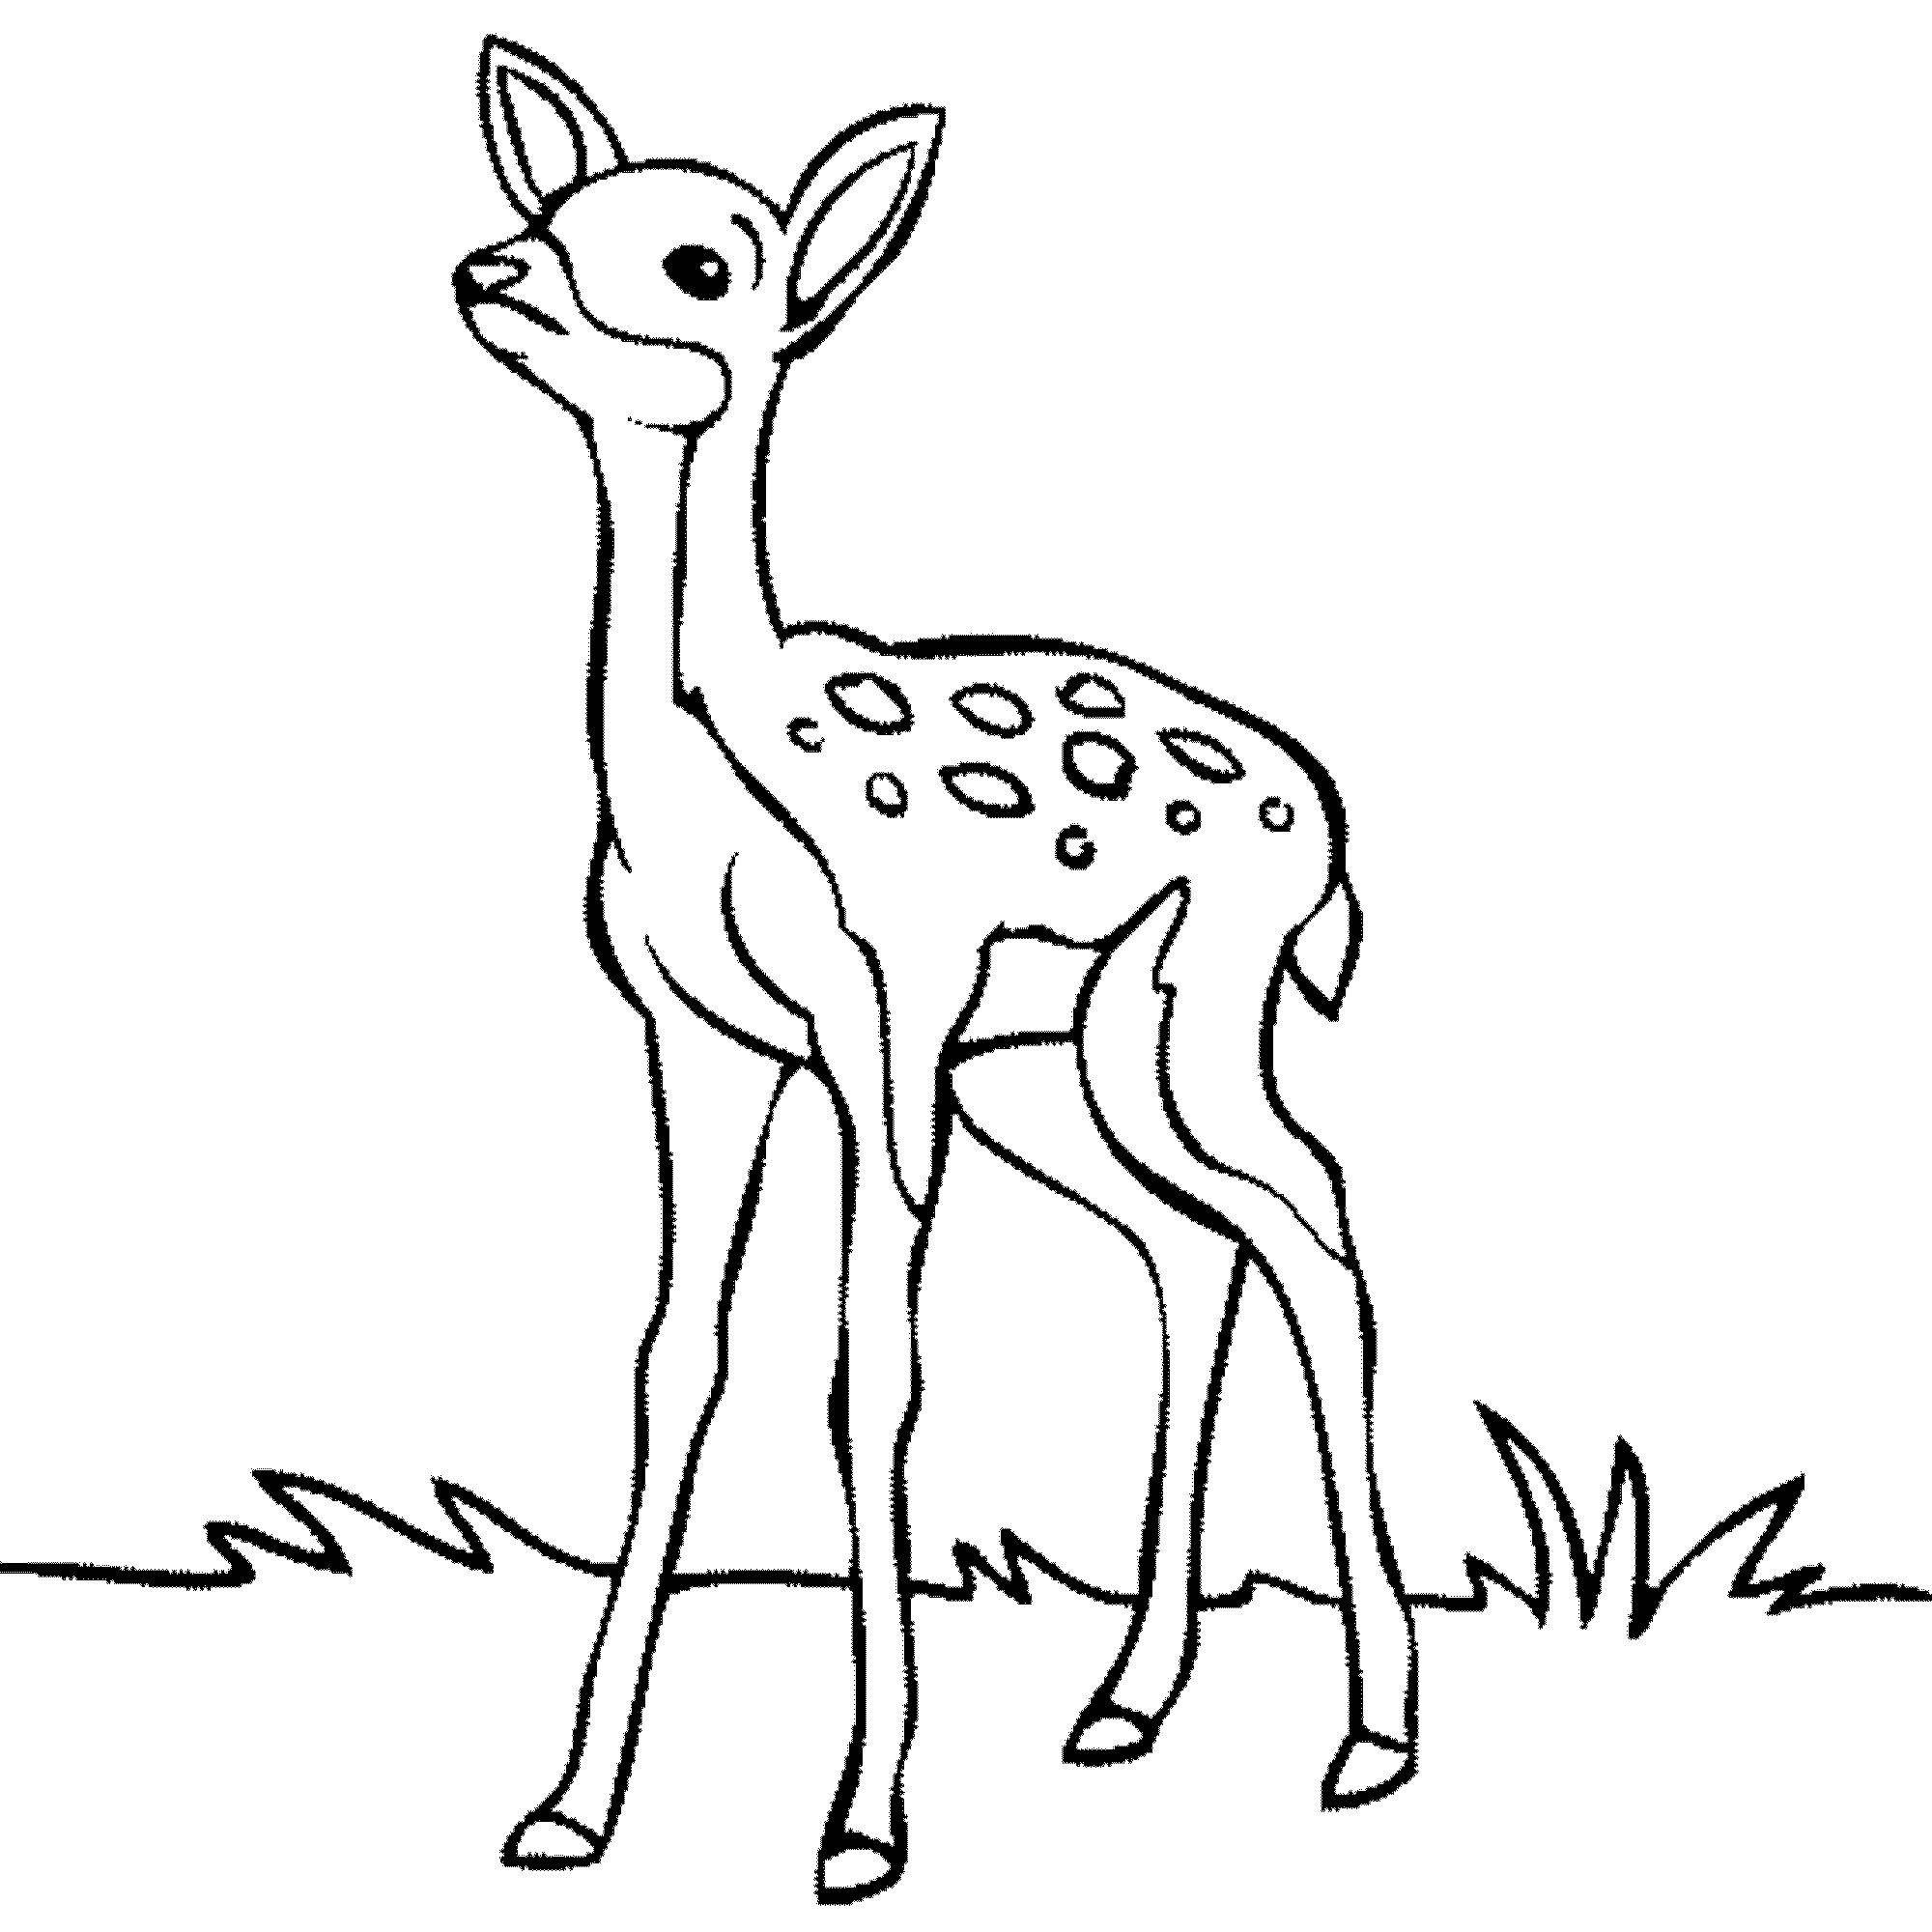 Baby Deer Coloring Page
 Print & Download Deer Coloring Pages for Totally